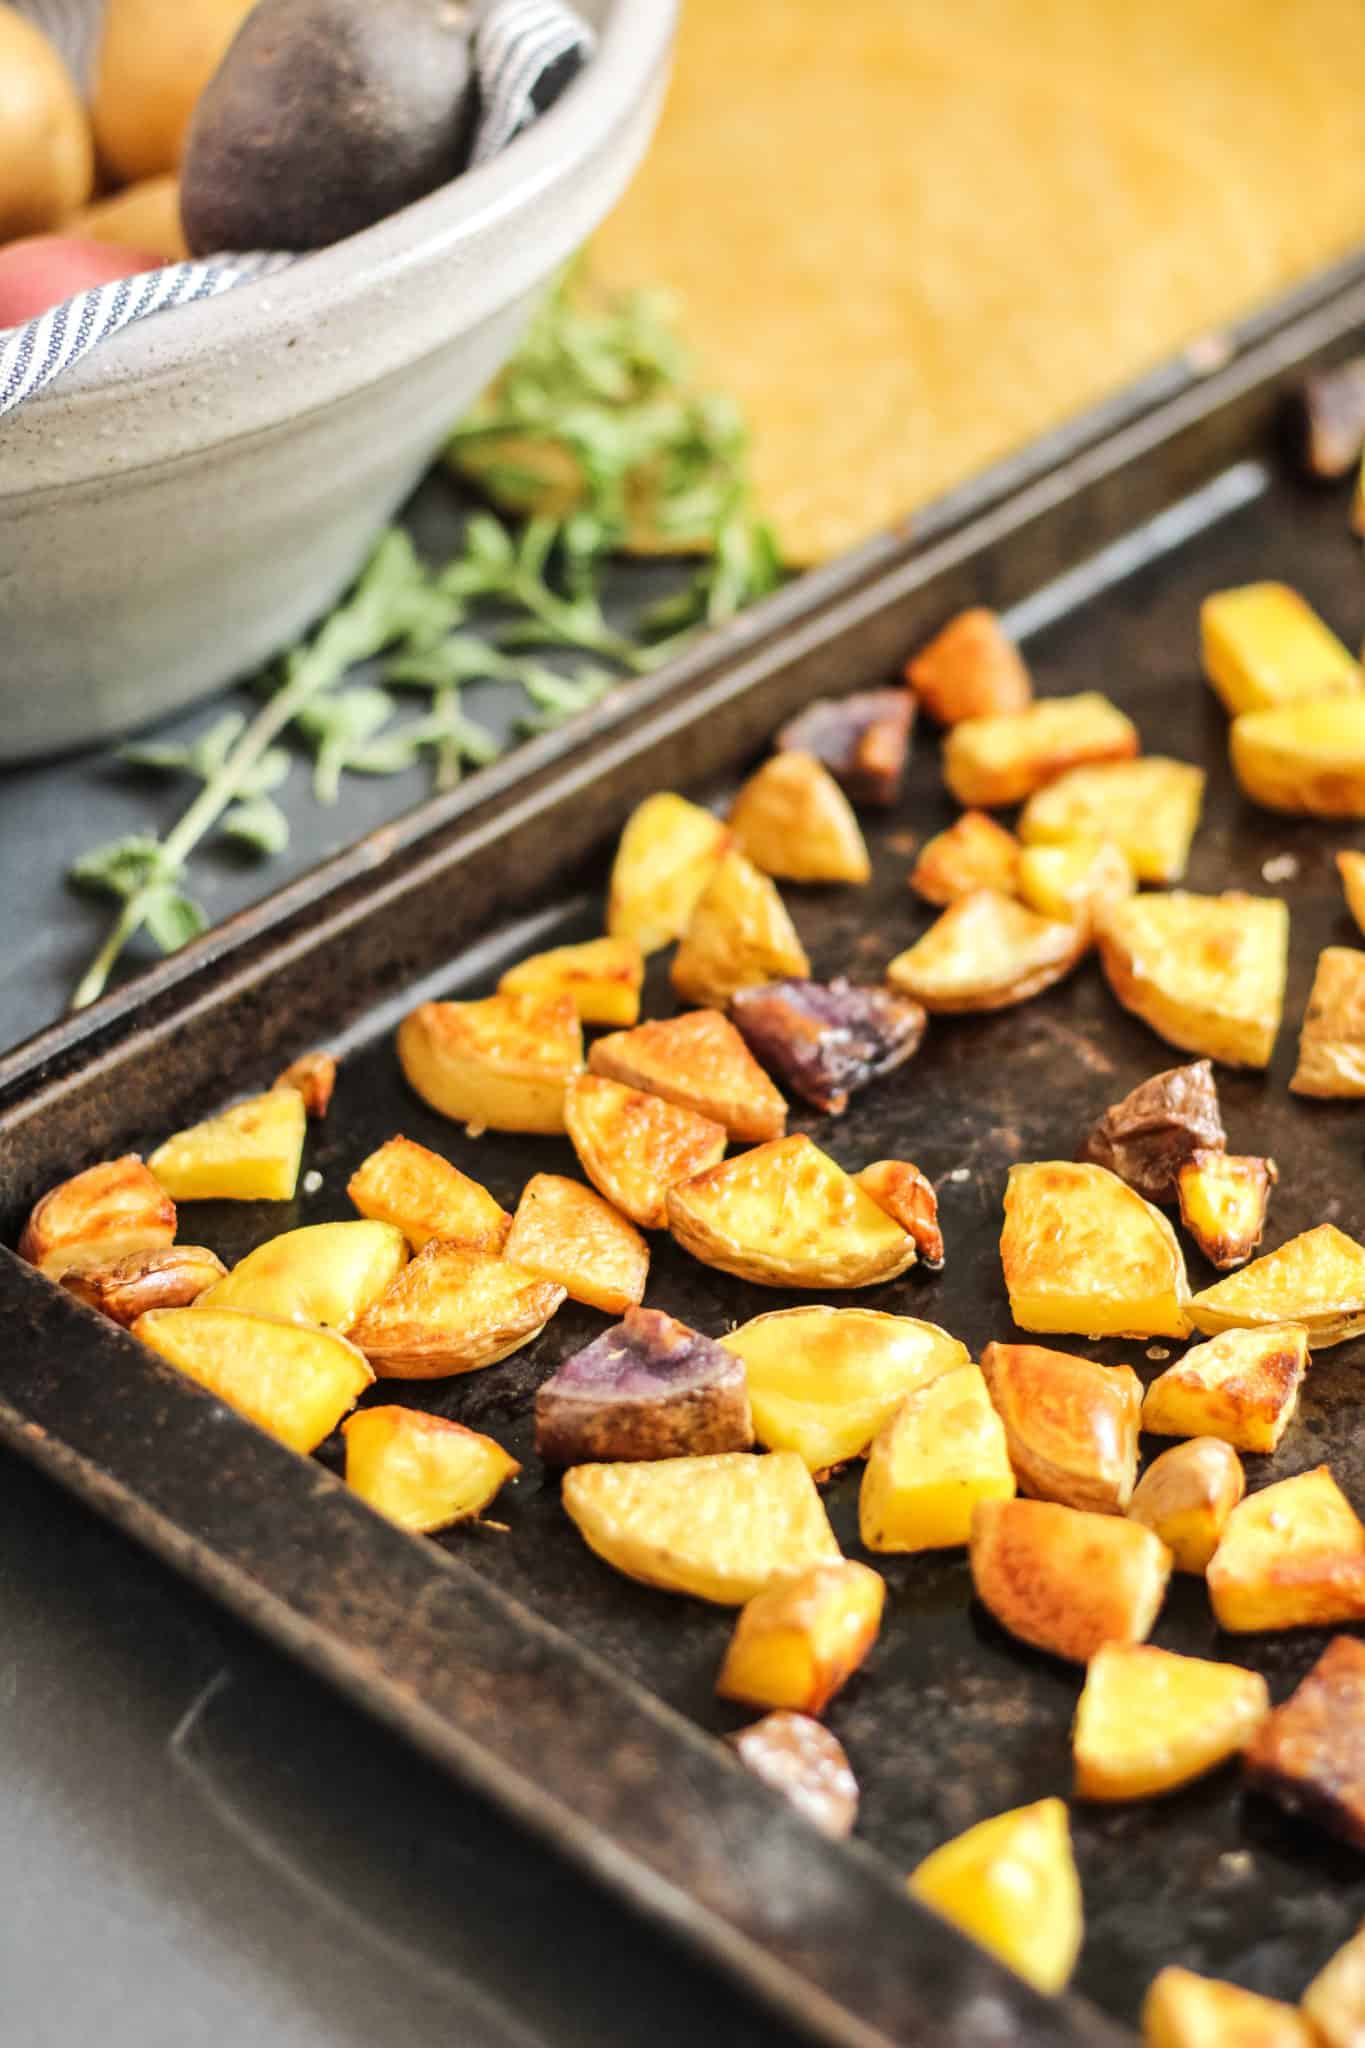 Roasted potatoes add important nutrients to this recipe for Chimichurri Potato Breakfast Tacos. Roast until the edges brown for a crispy crunch when you bite in!